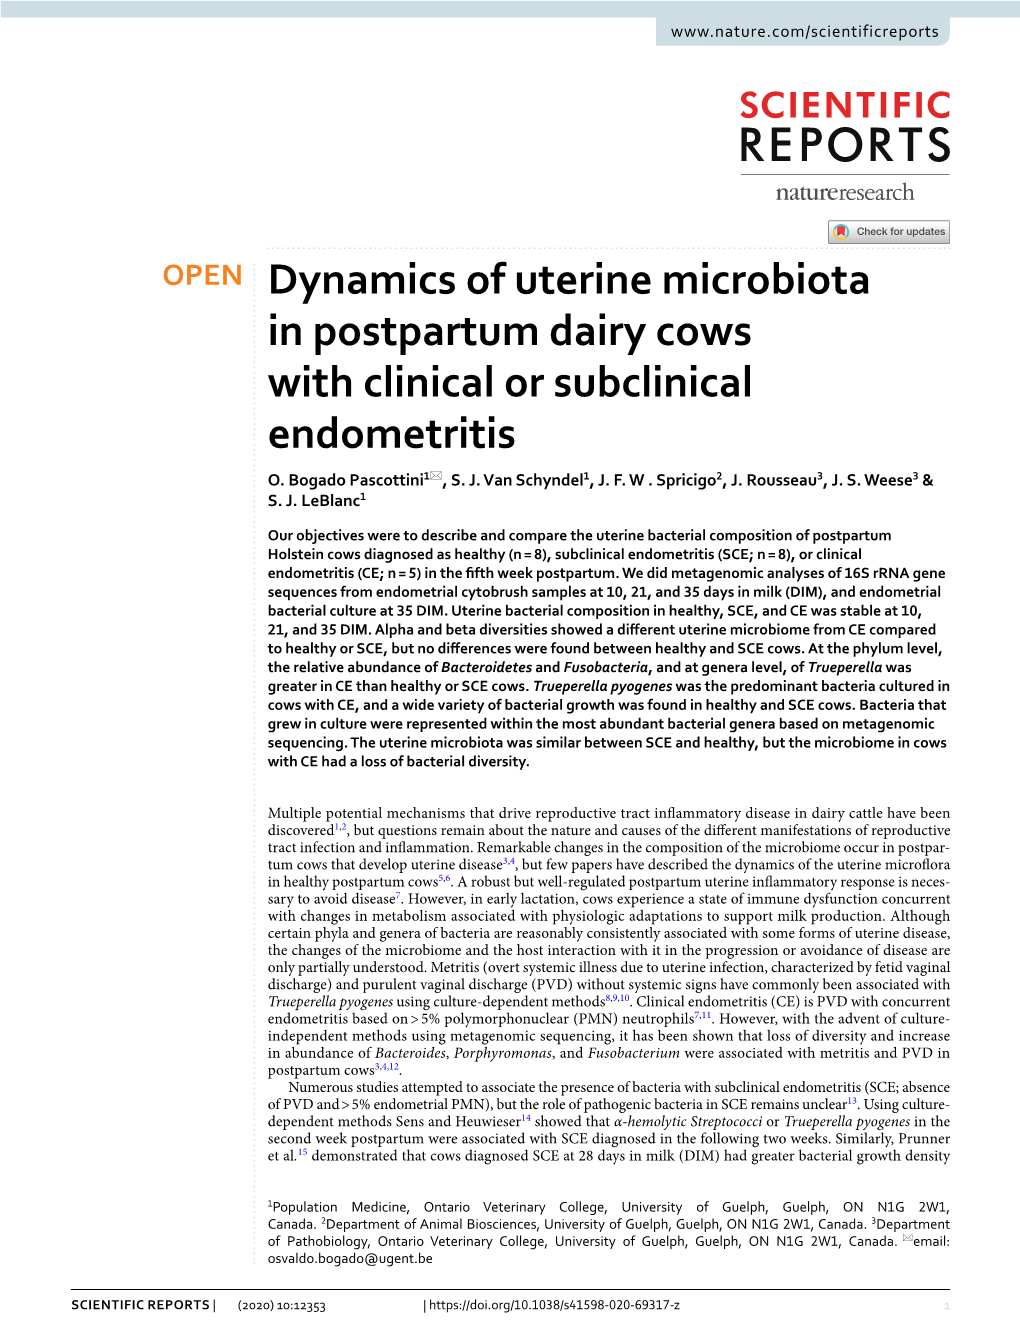 Dynamics of Uterine Microbiota in Postpartum Dairy Cows with Clinical Or Subclinical Endometritis O